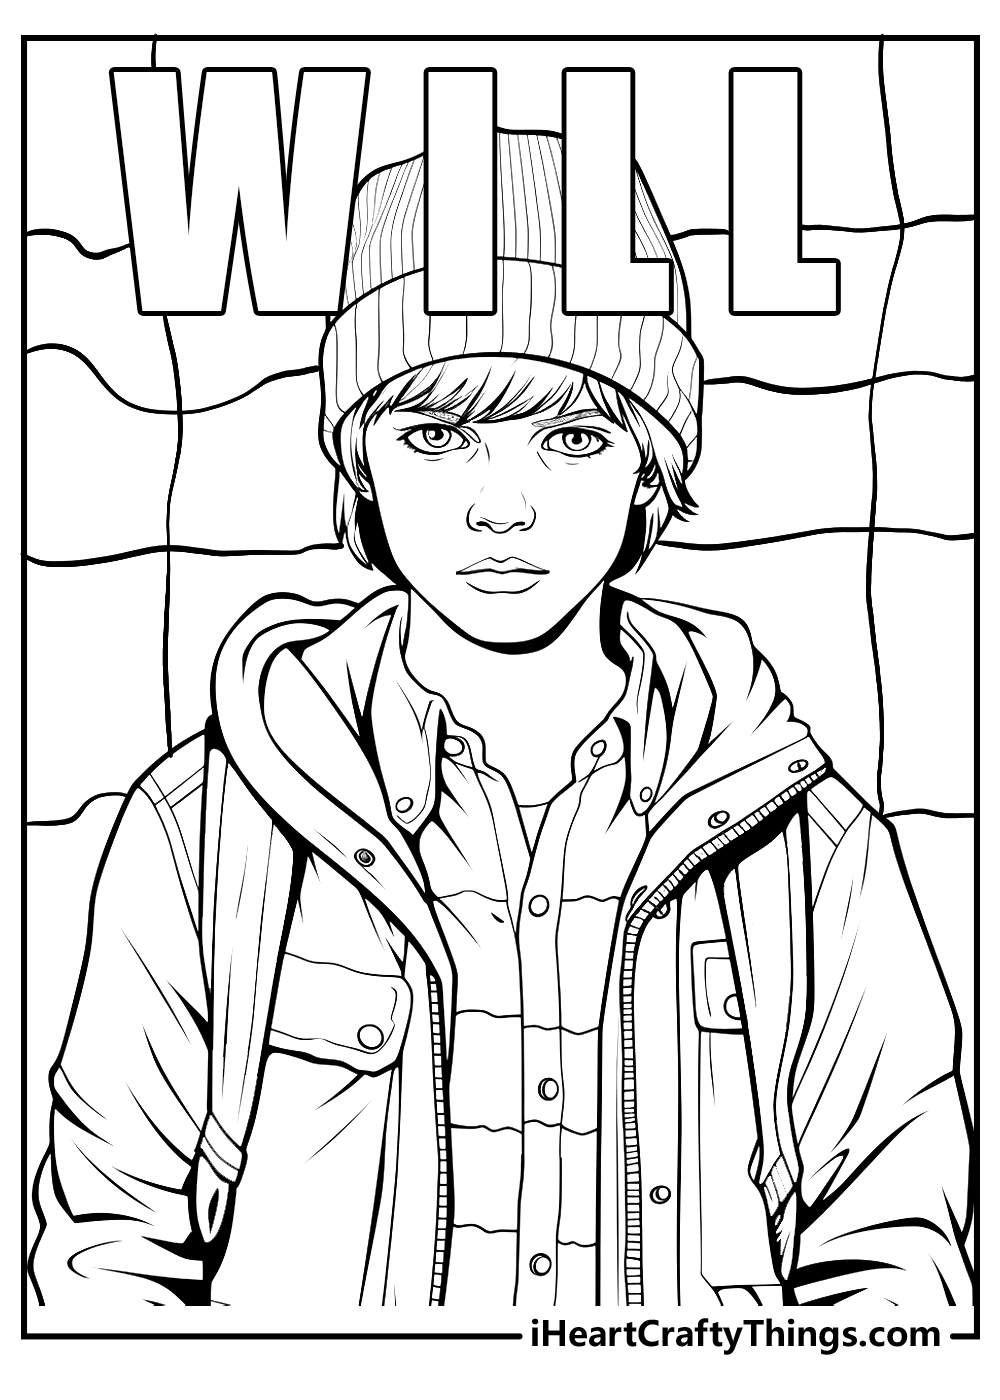 Printable stranger things coloring pages updated